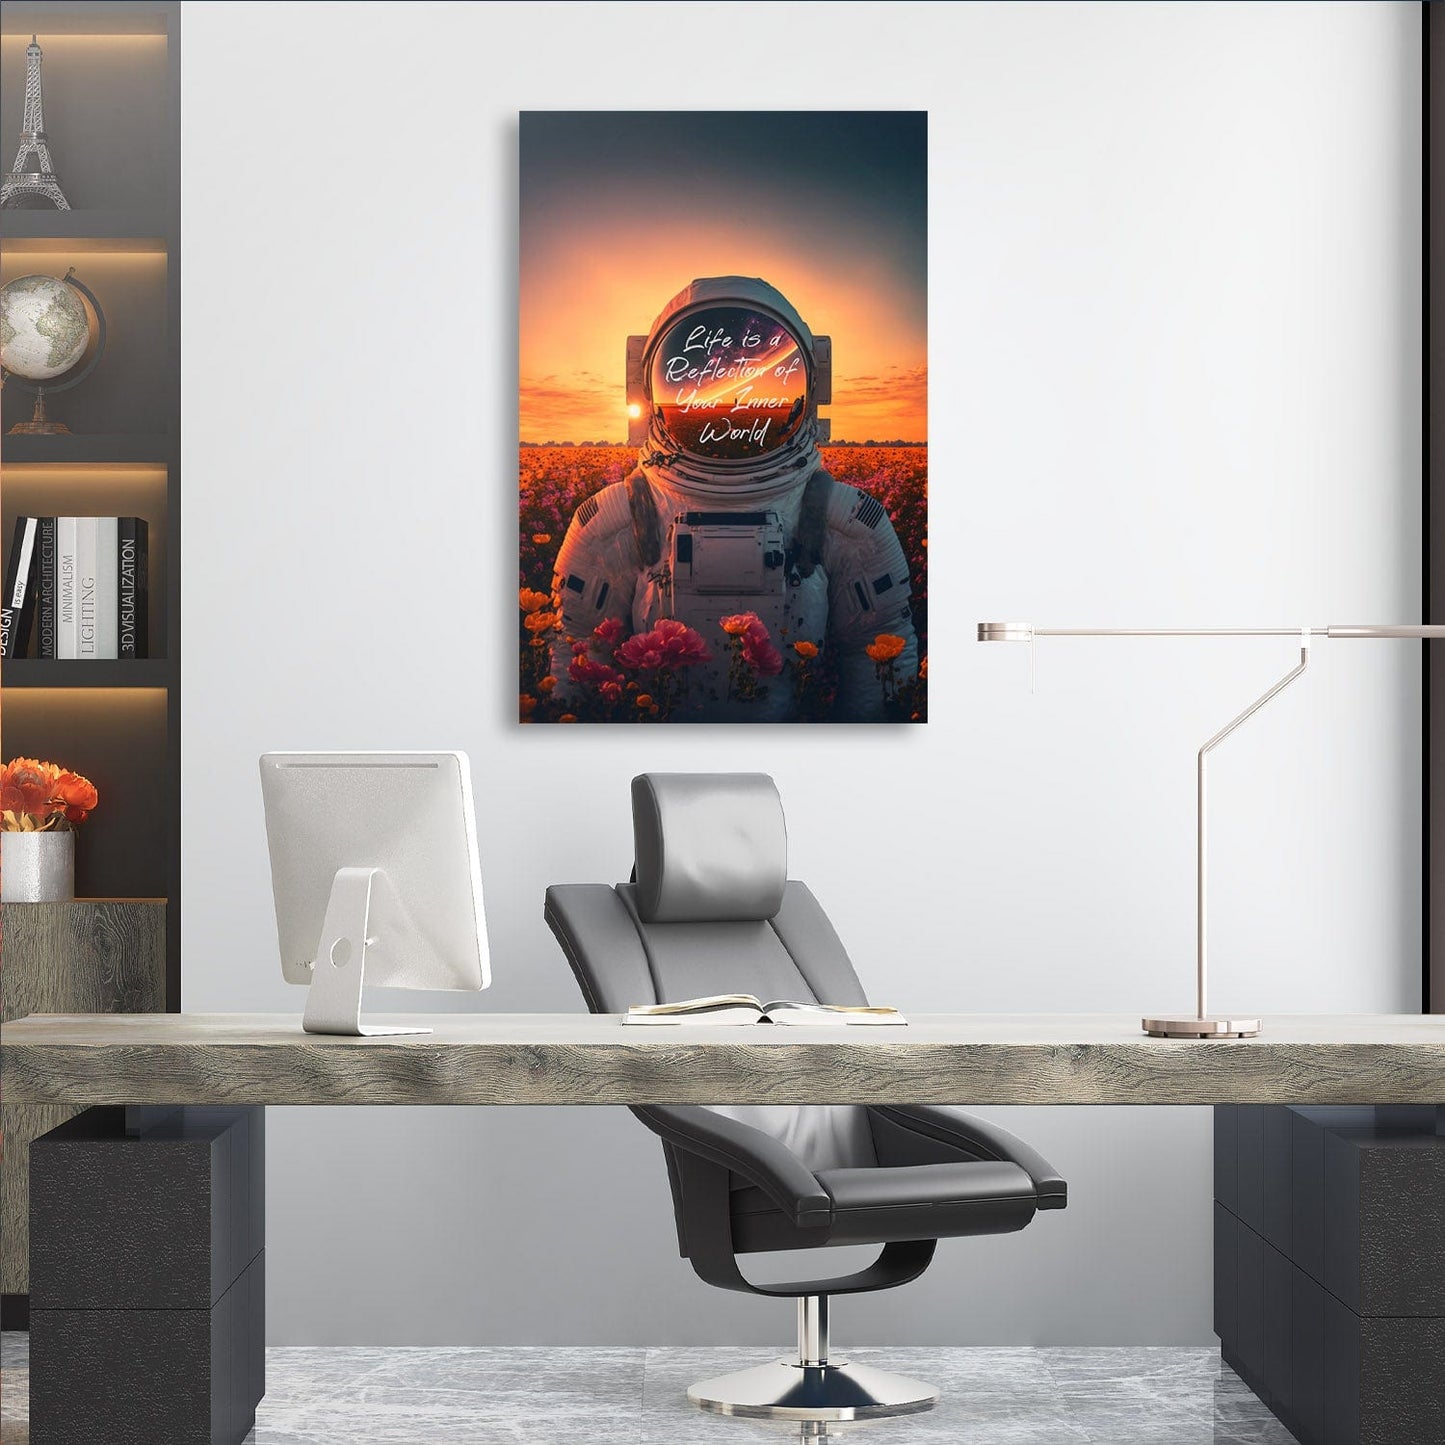 Astronaut Flowers - Life Reflects Your Inner World Quote Wall Art | Inspirational Wall Art Motivational Wall Art Quotes Office Art | ImpaktMaker Exclusive Canvas Art Portrait